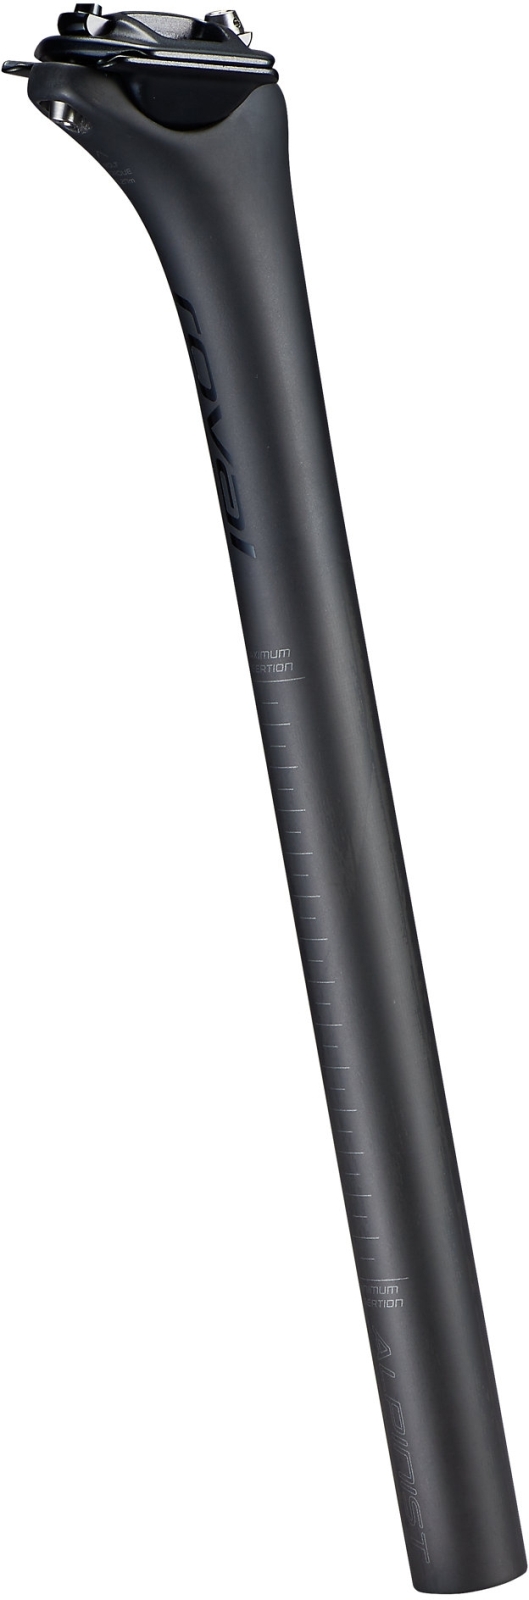 Specialized Roval Alpinist Carbon Post 27.2x360 mm